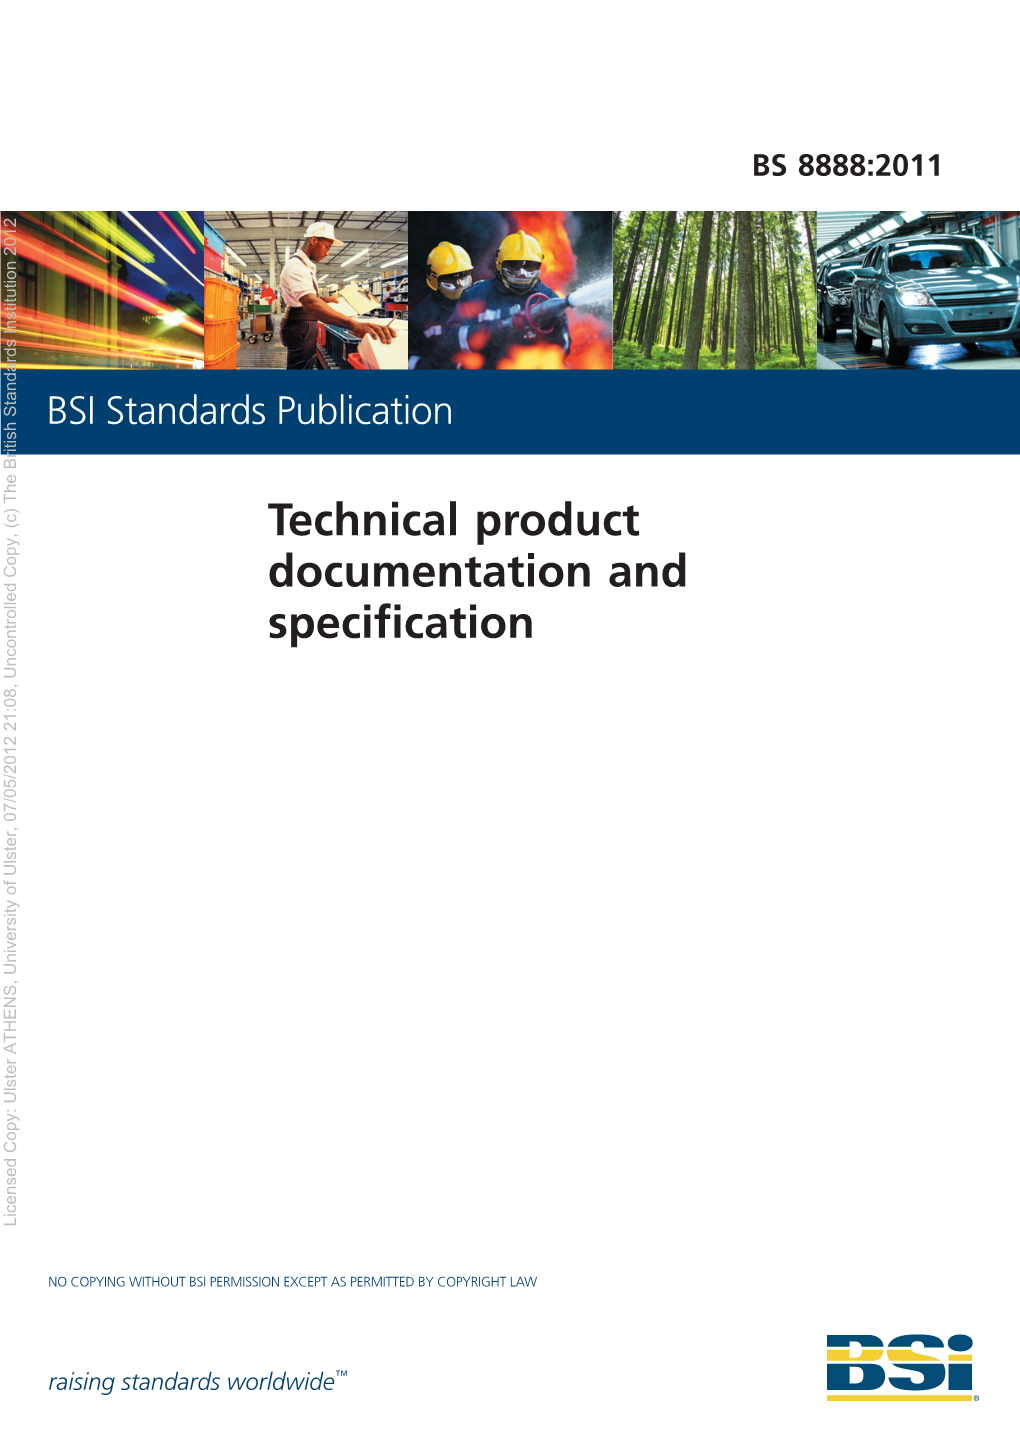 Technical Product Documentation and Specification